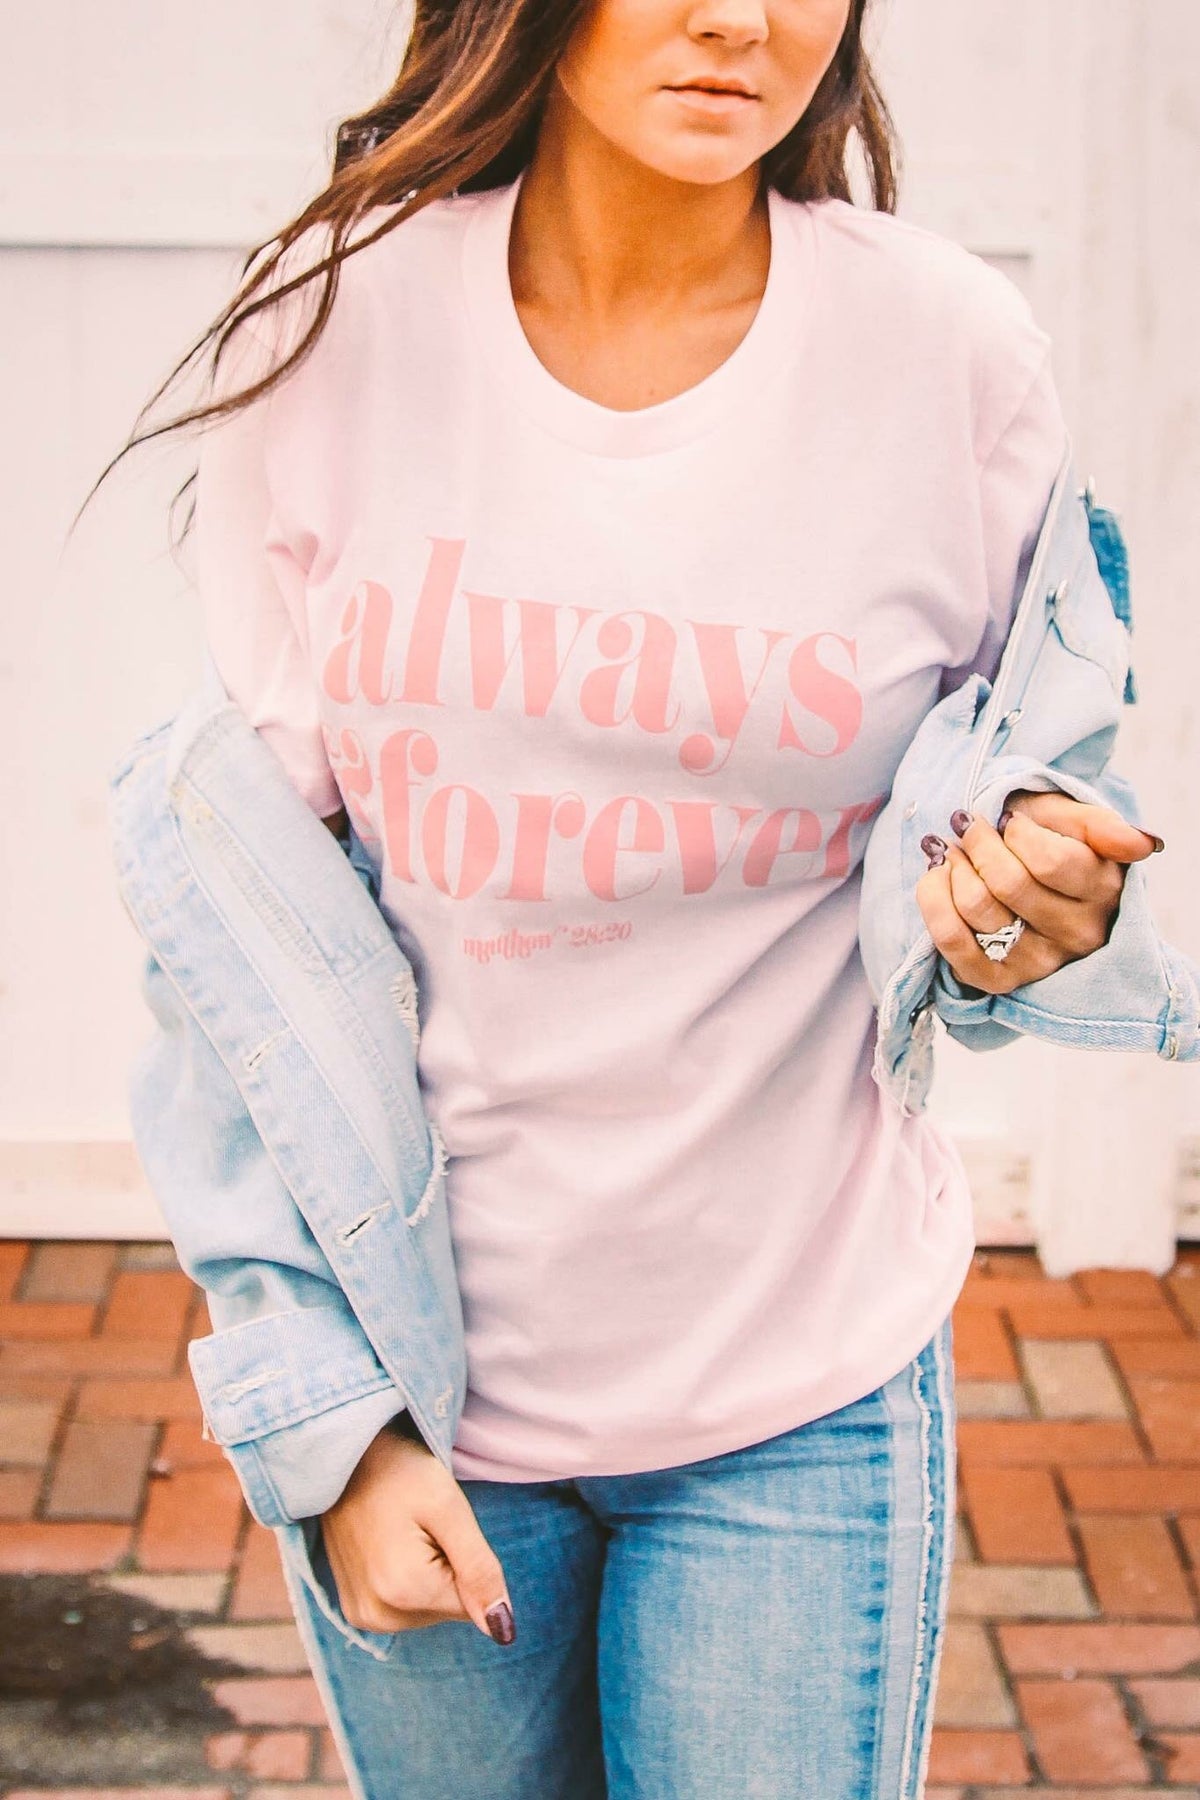 Always & Forever Graphic Tee